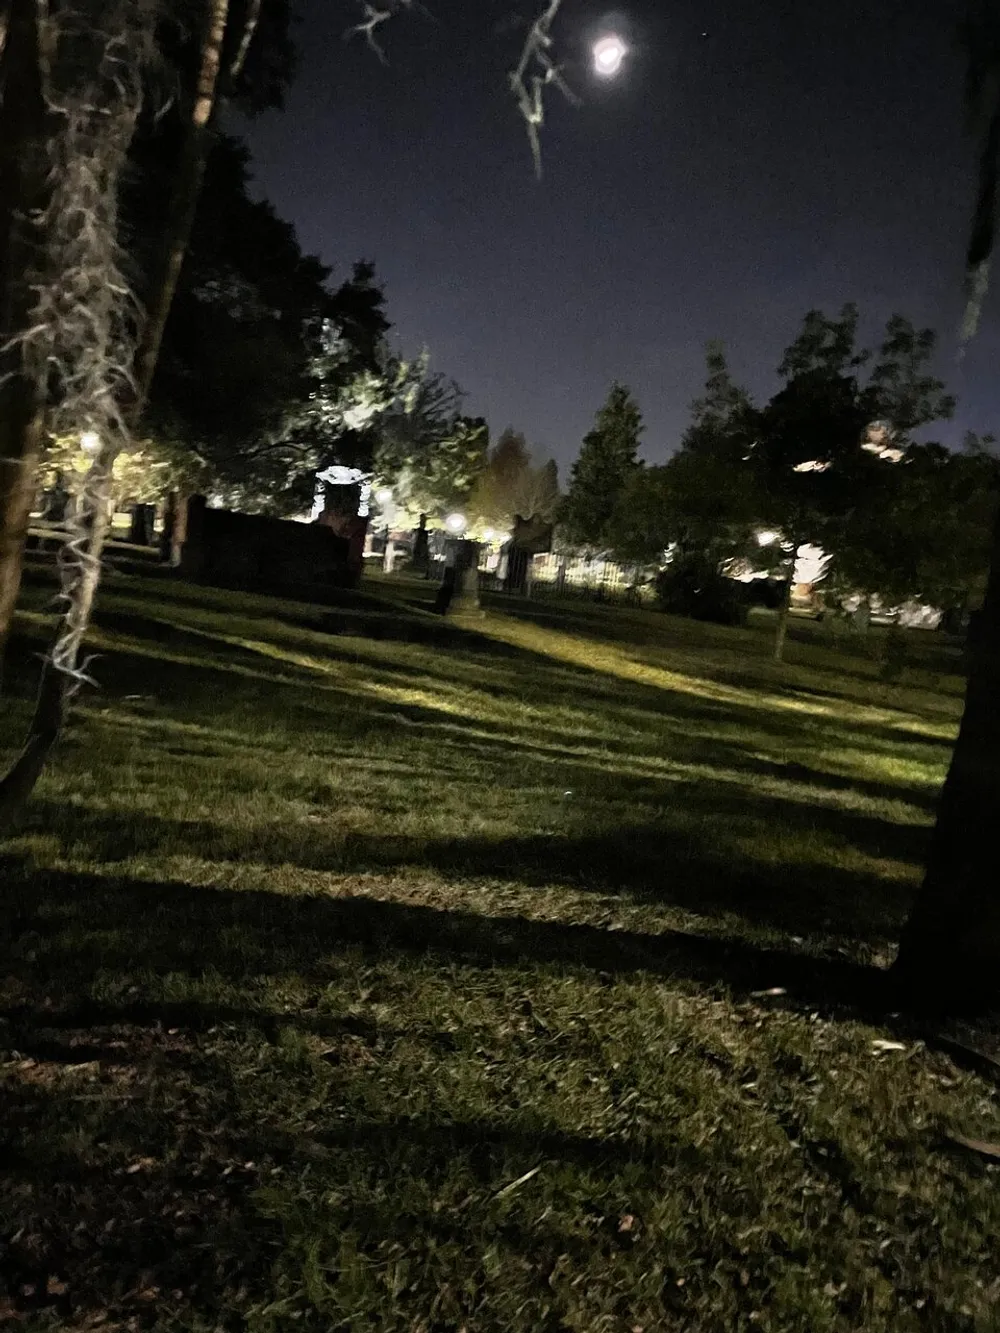 The image depicts a dimly lit park at night with the moon shining above and elongated shadows cast on the grass by surrounding trees